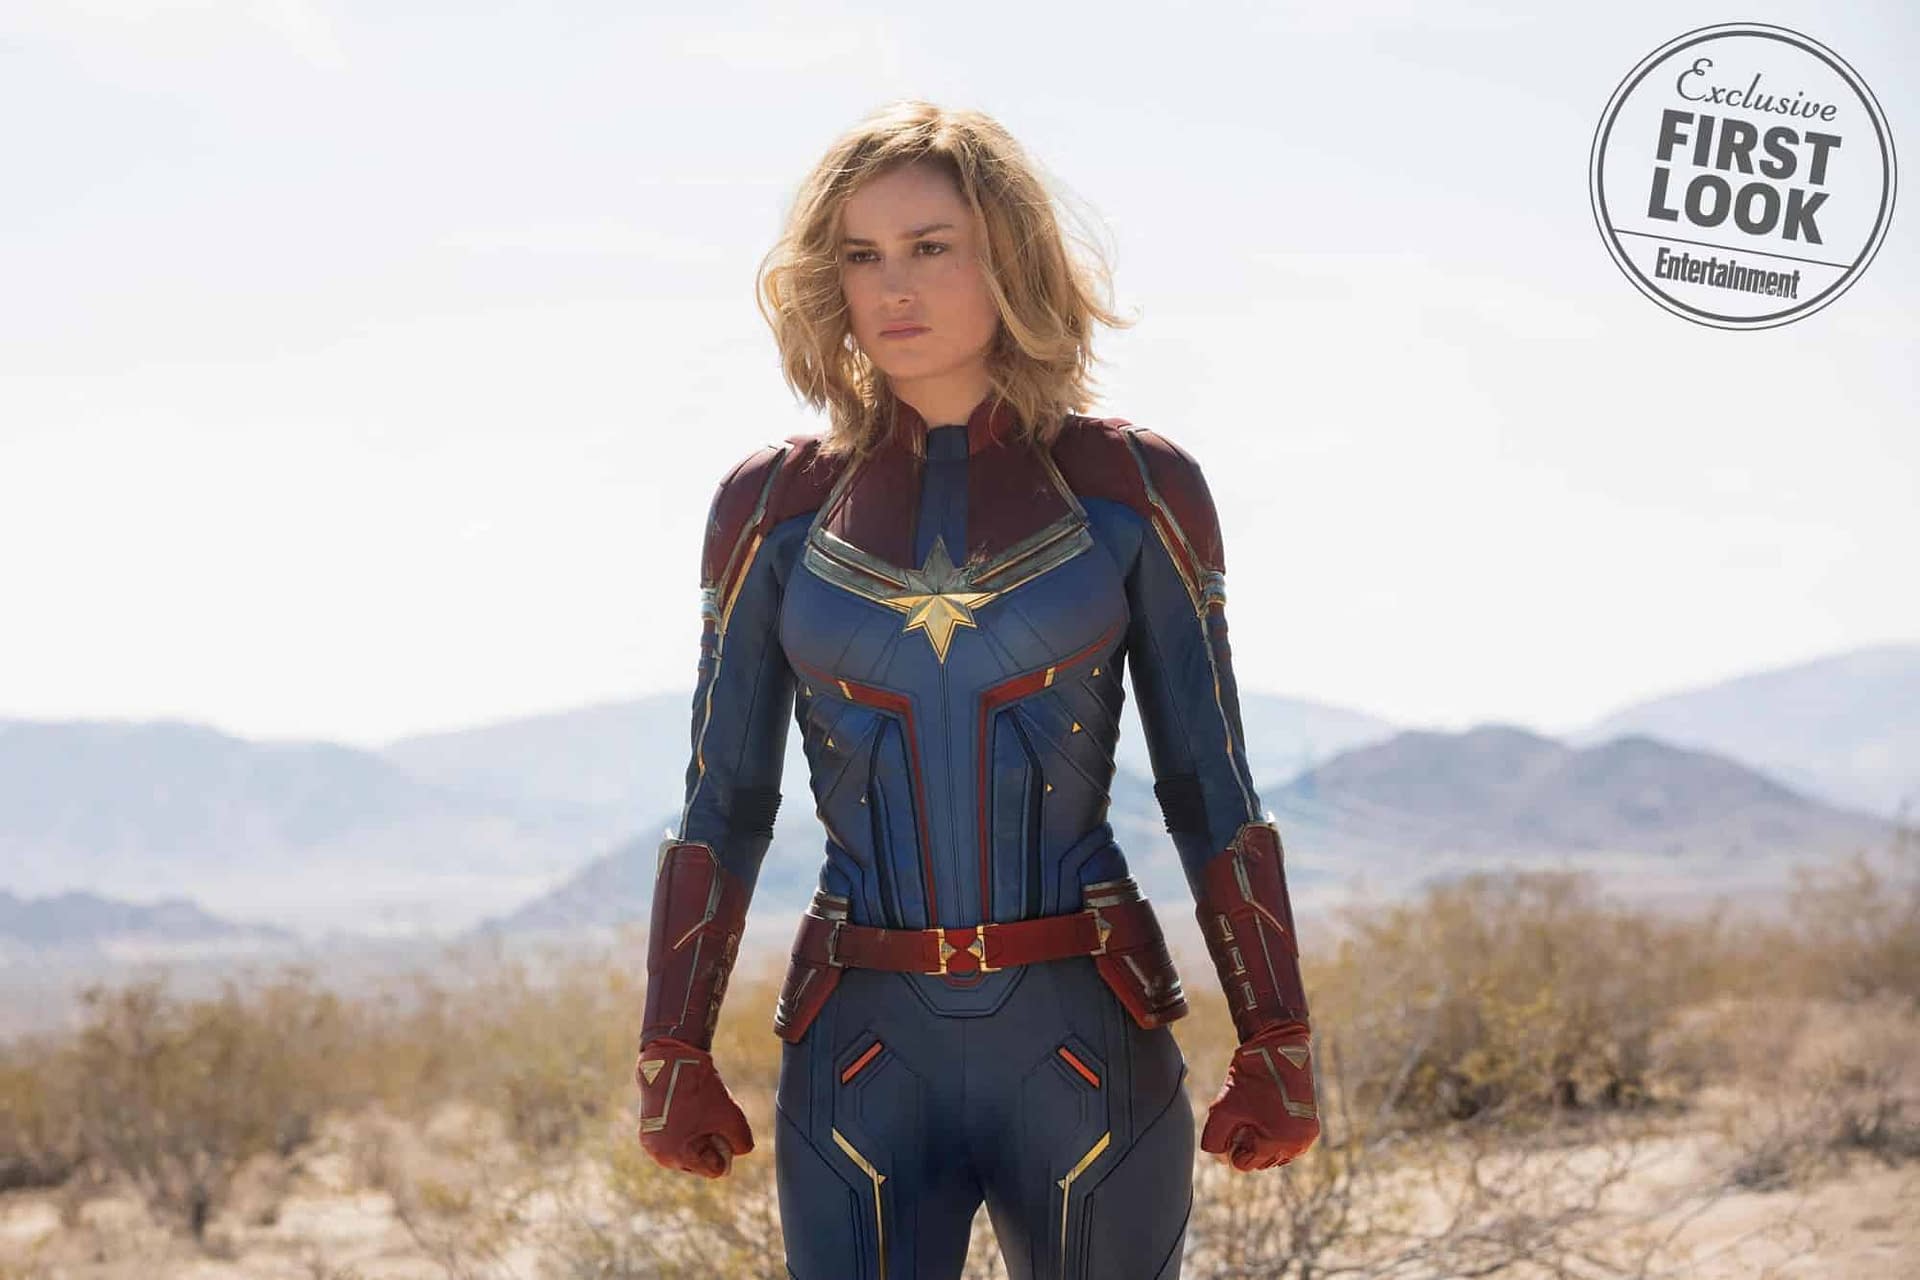 Captain Marvel: Brie Larson Found "a Little Keanu Reeves" in Herself During Training